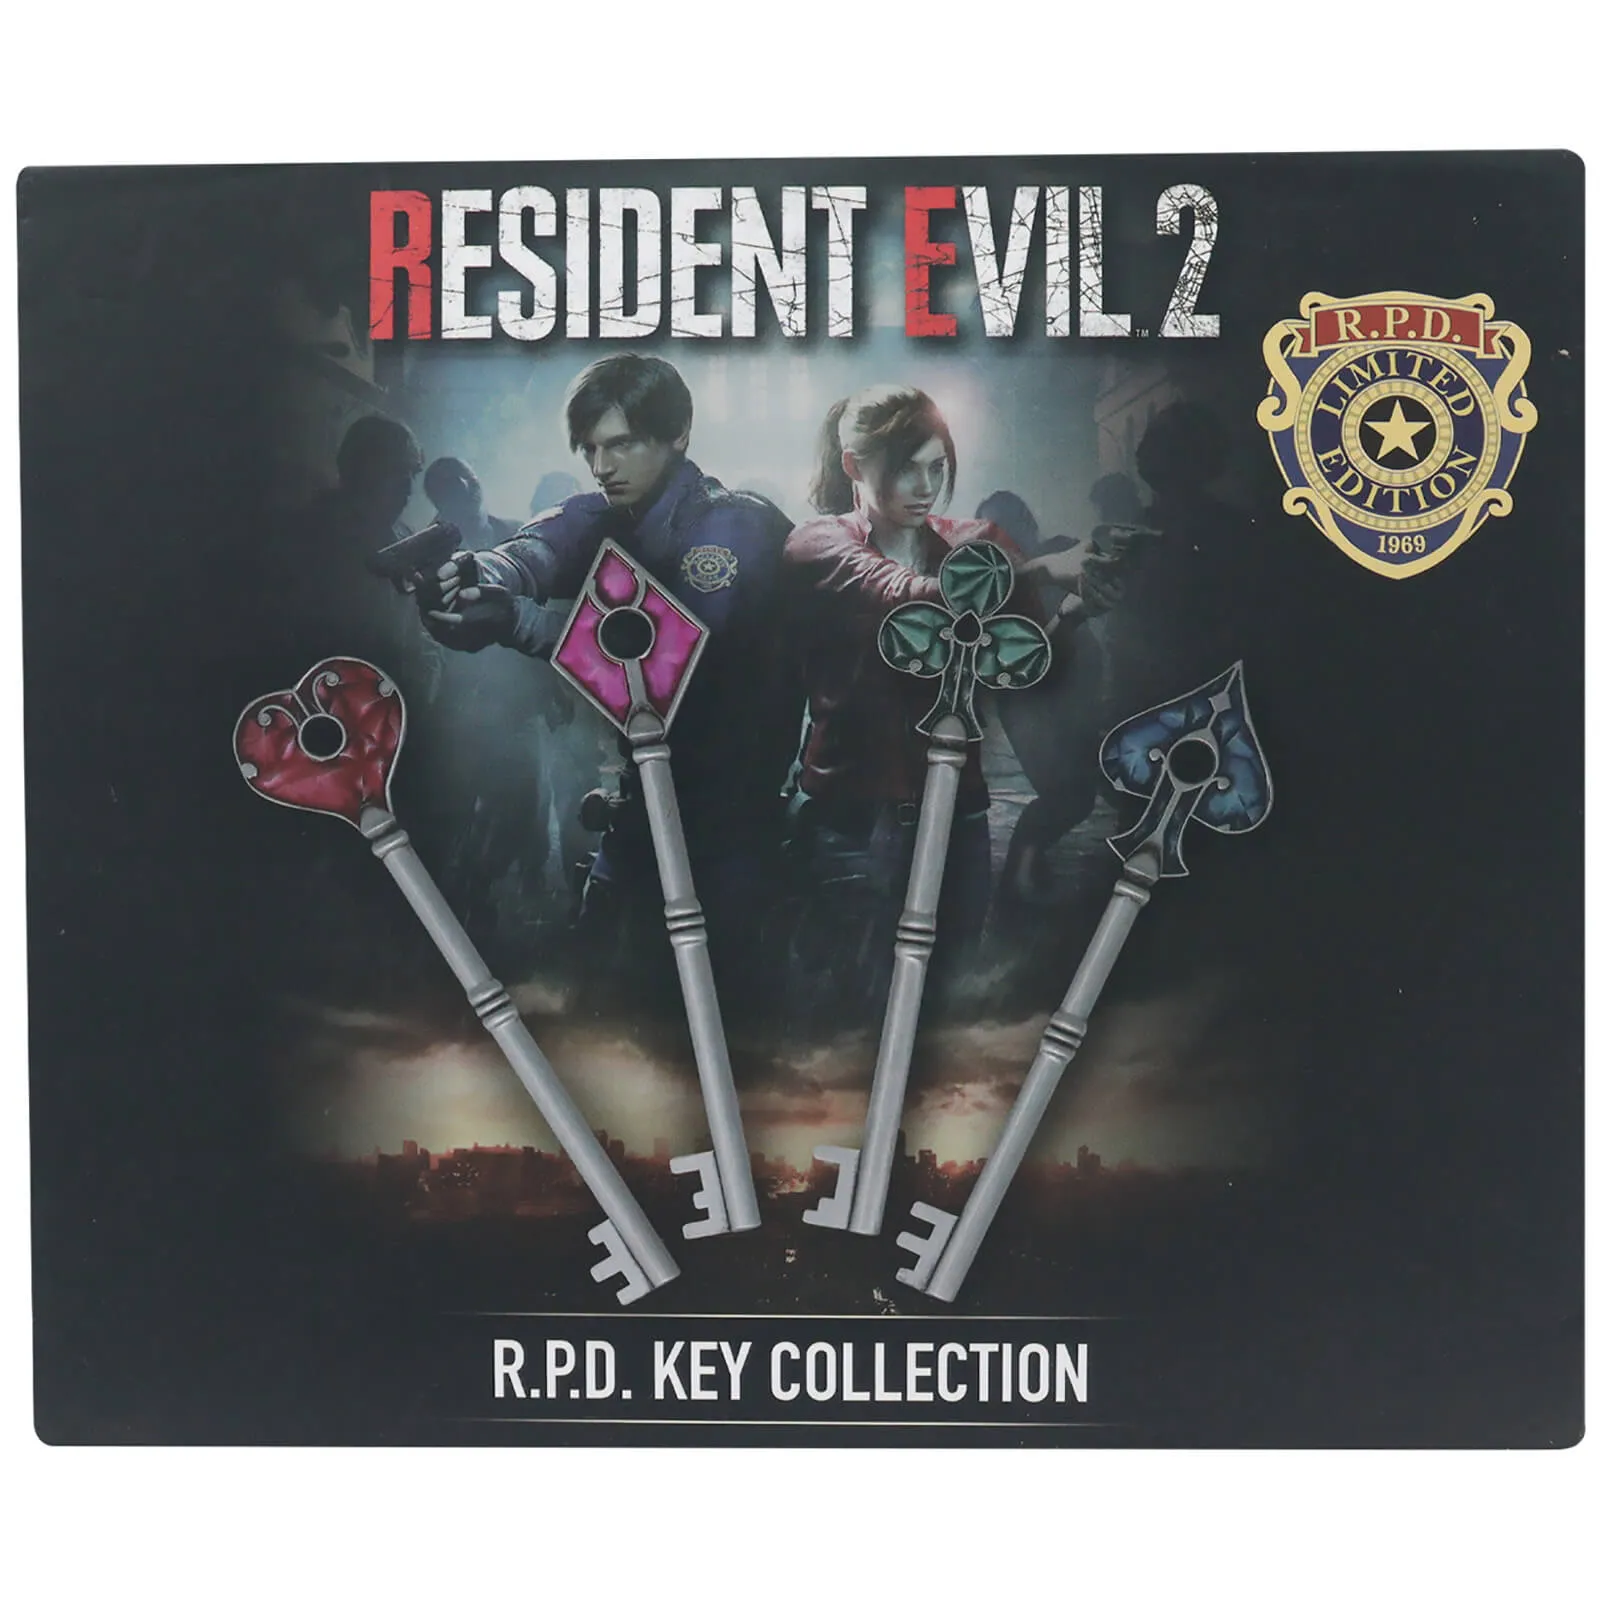  Resident Evil 2 R.P.D Key Collection